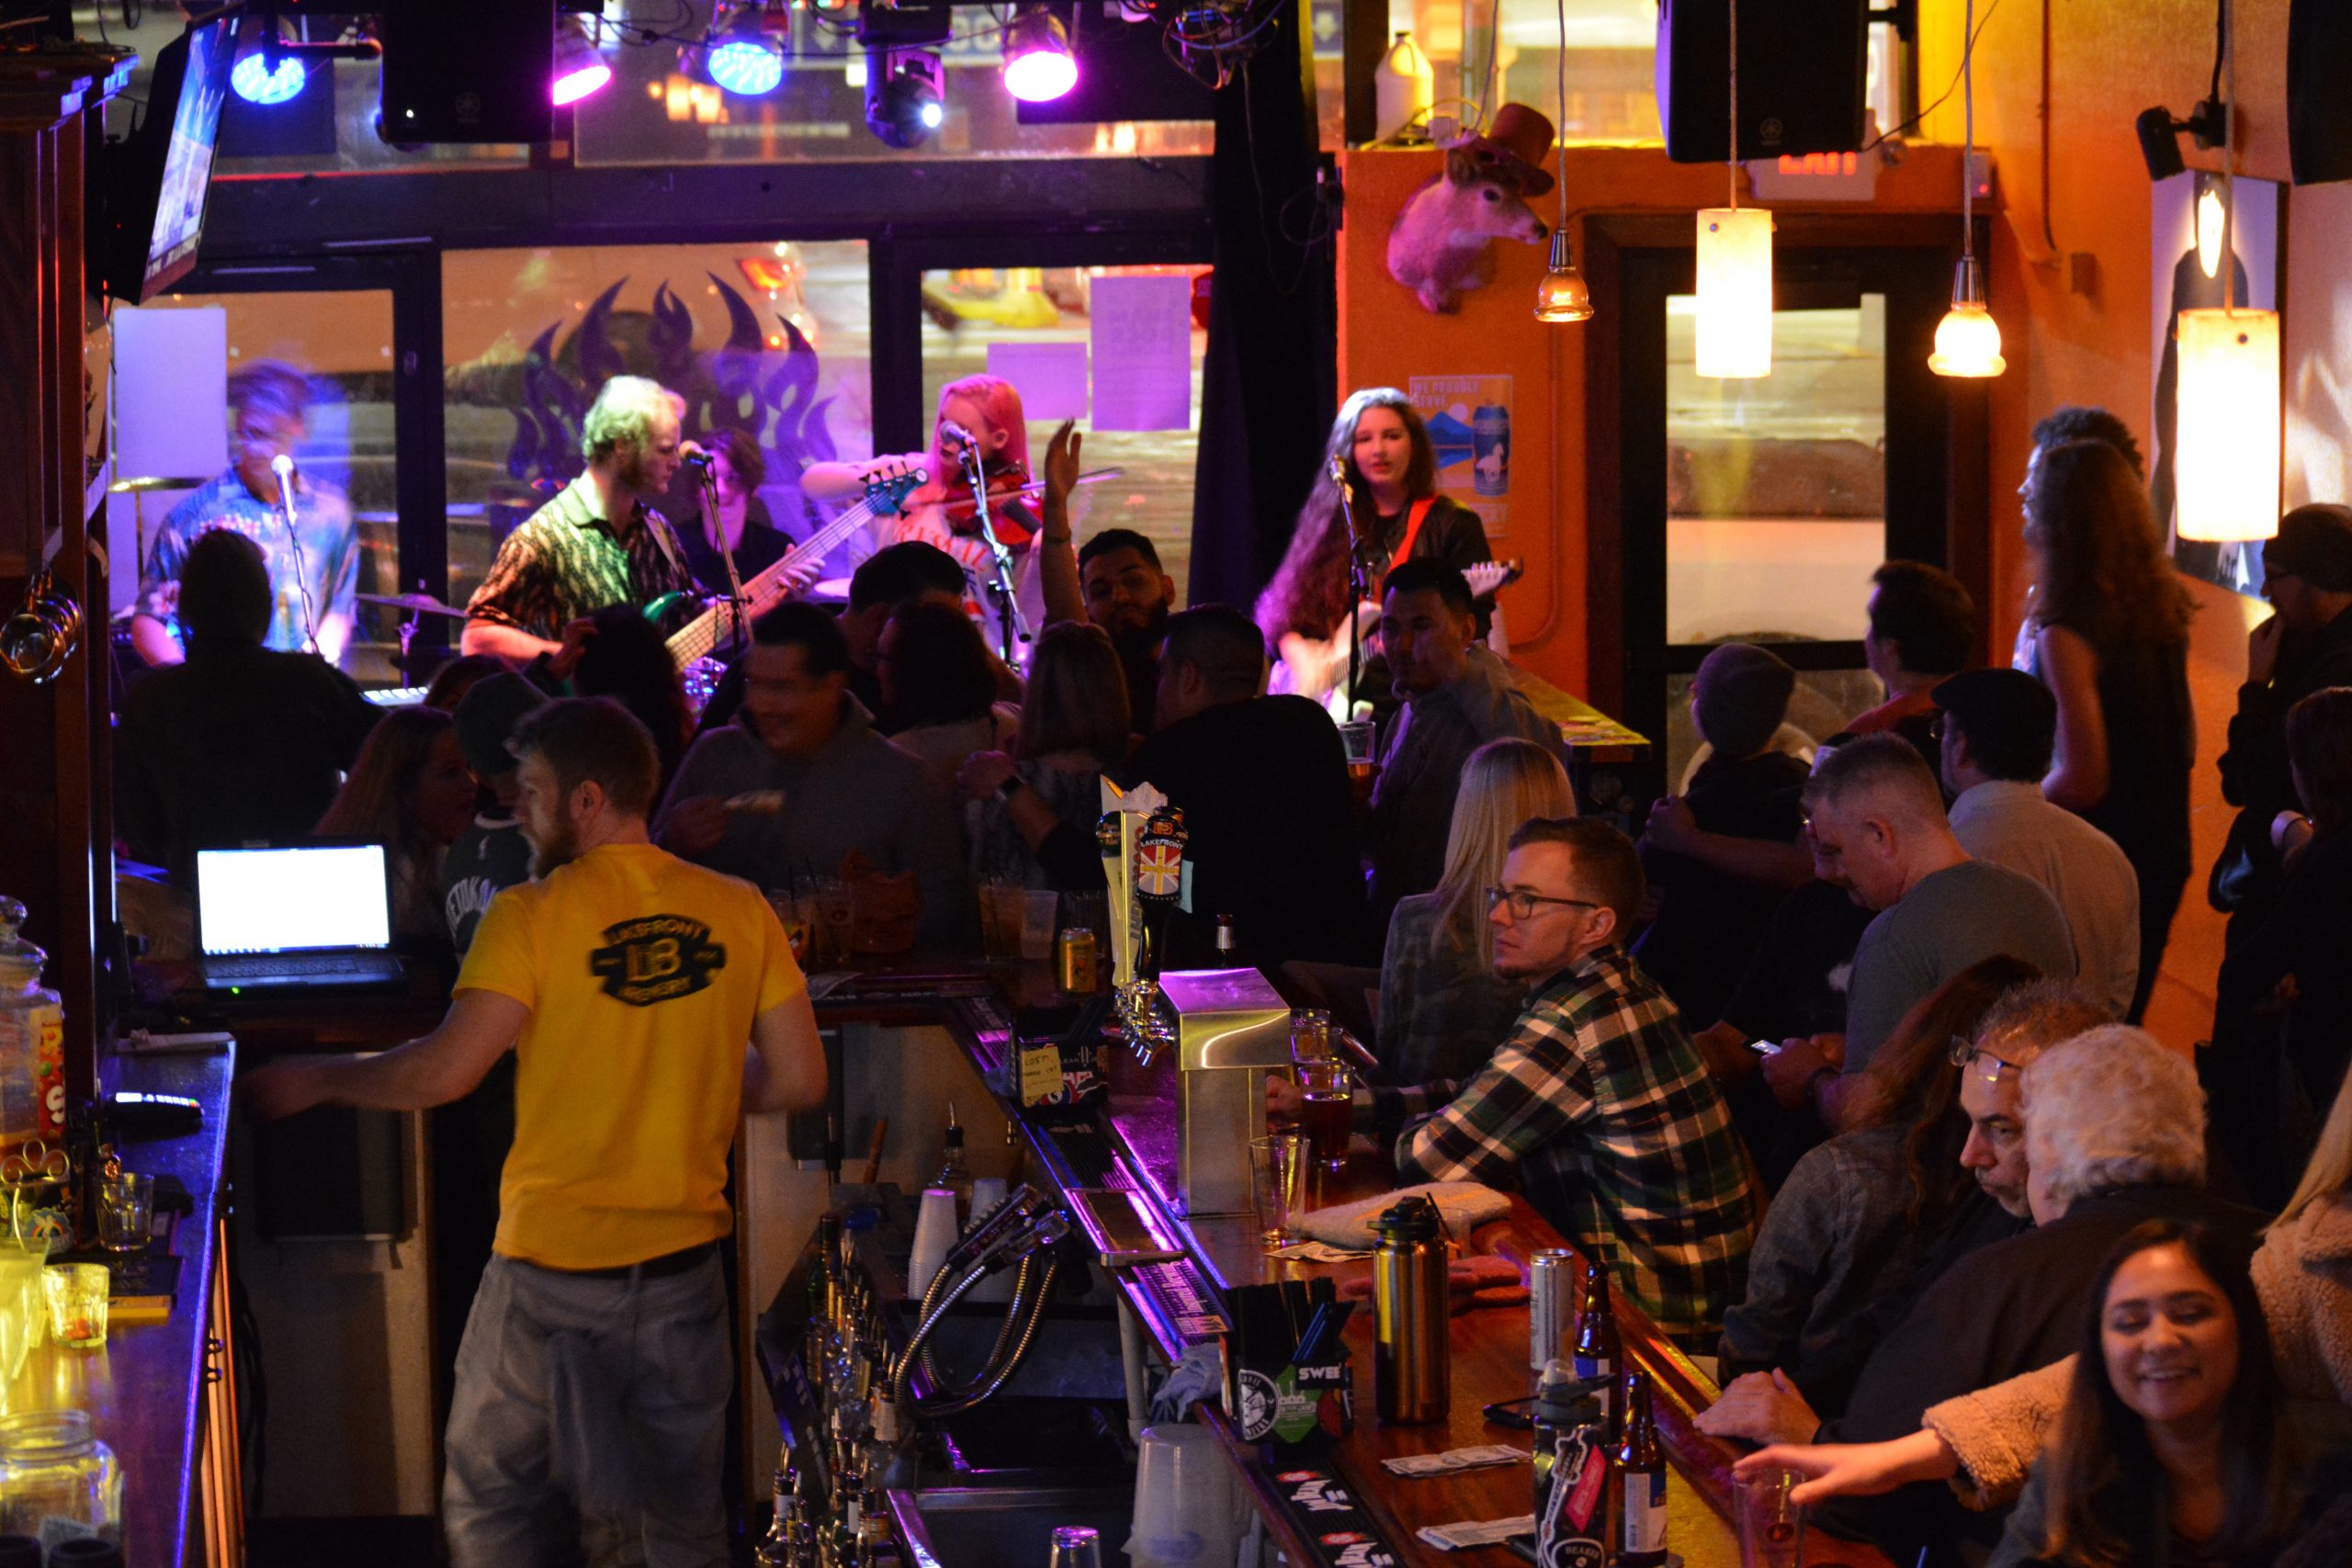 The band in the background with the bar and the crowd in the foreground